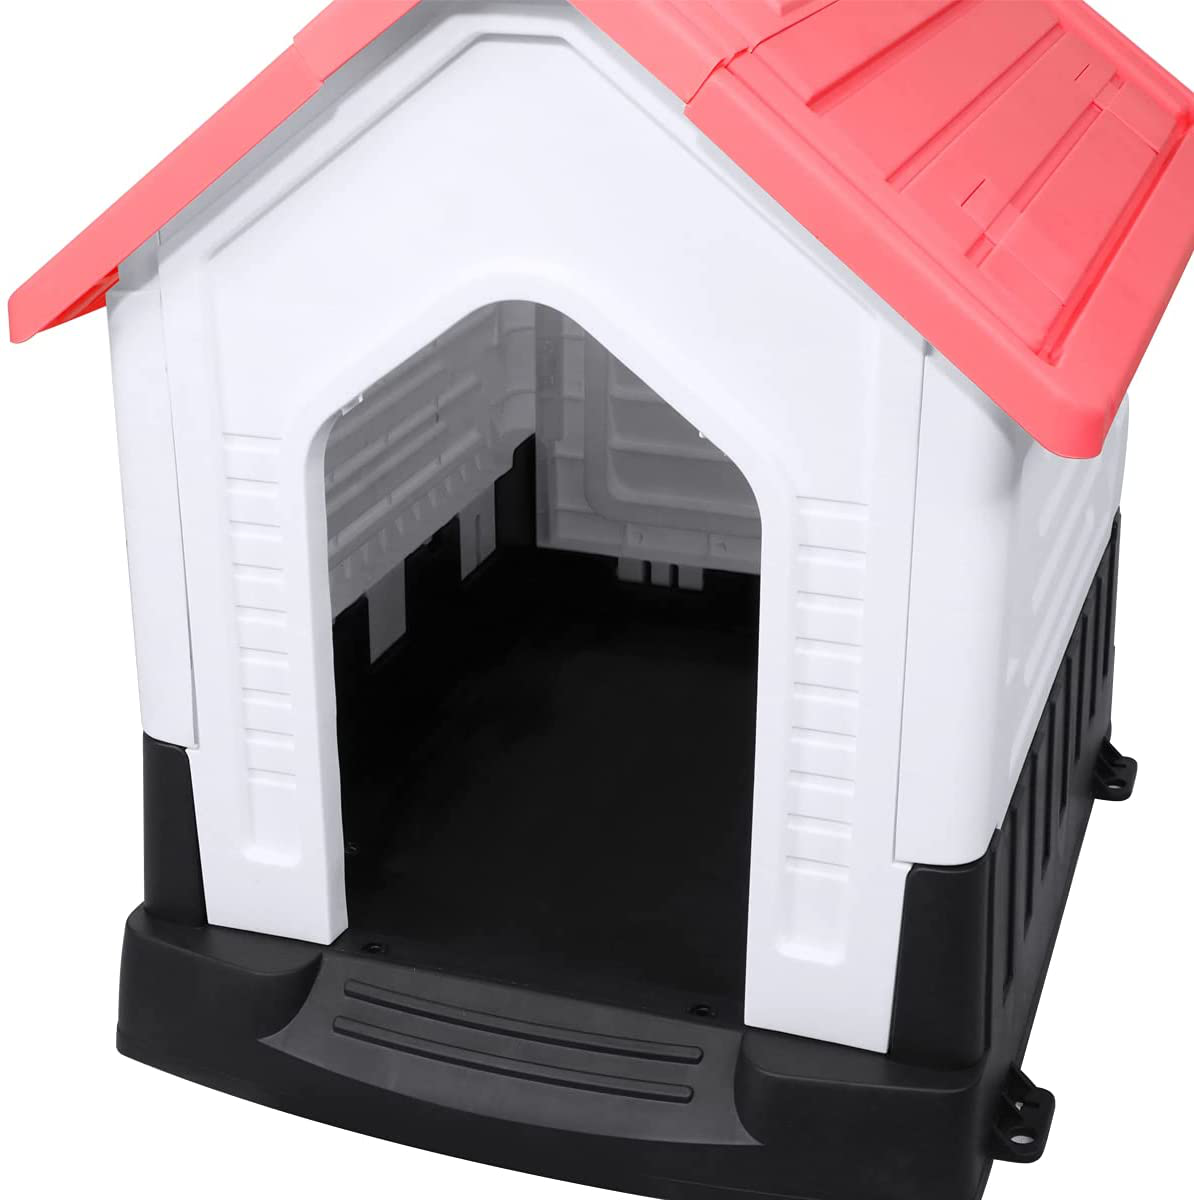 Magshion Durable Waterproof Plastic Dog Puppy House Indoor & Outdoor Pet Shelter with Elevated Floor